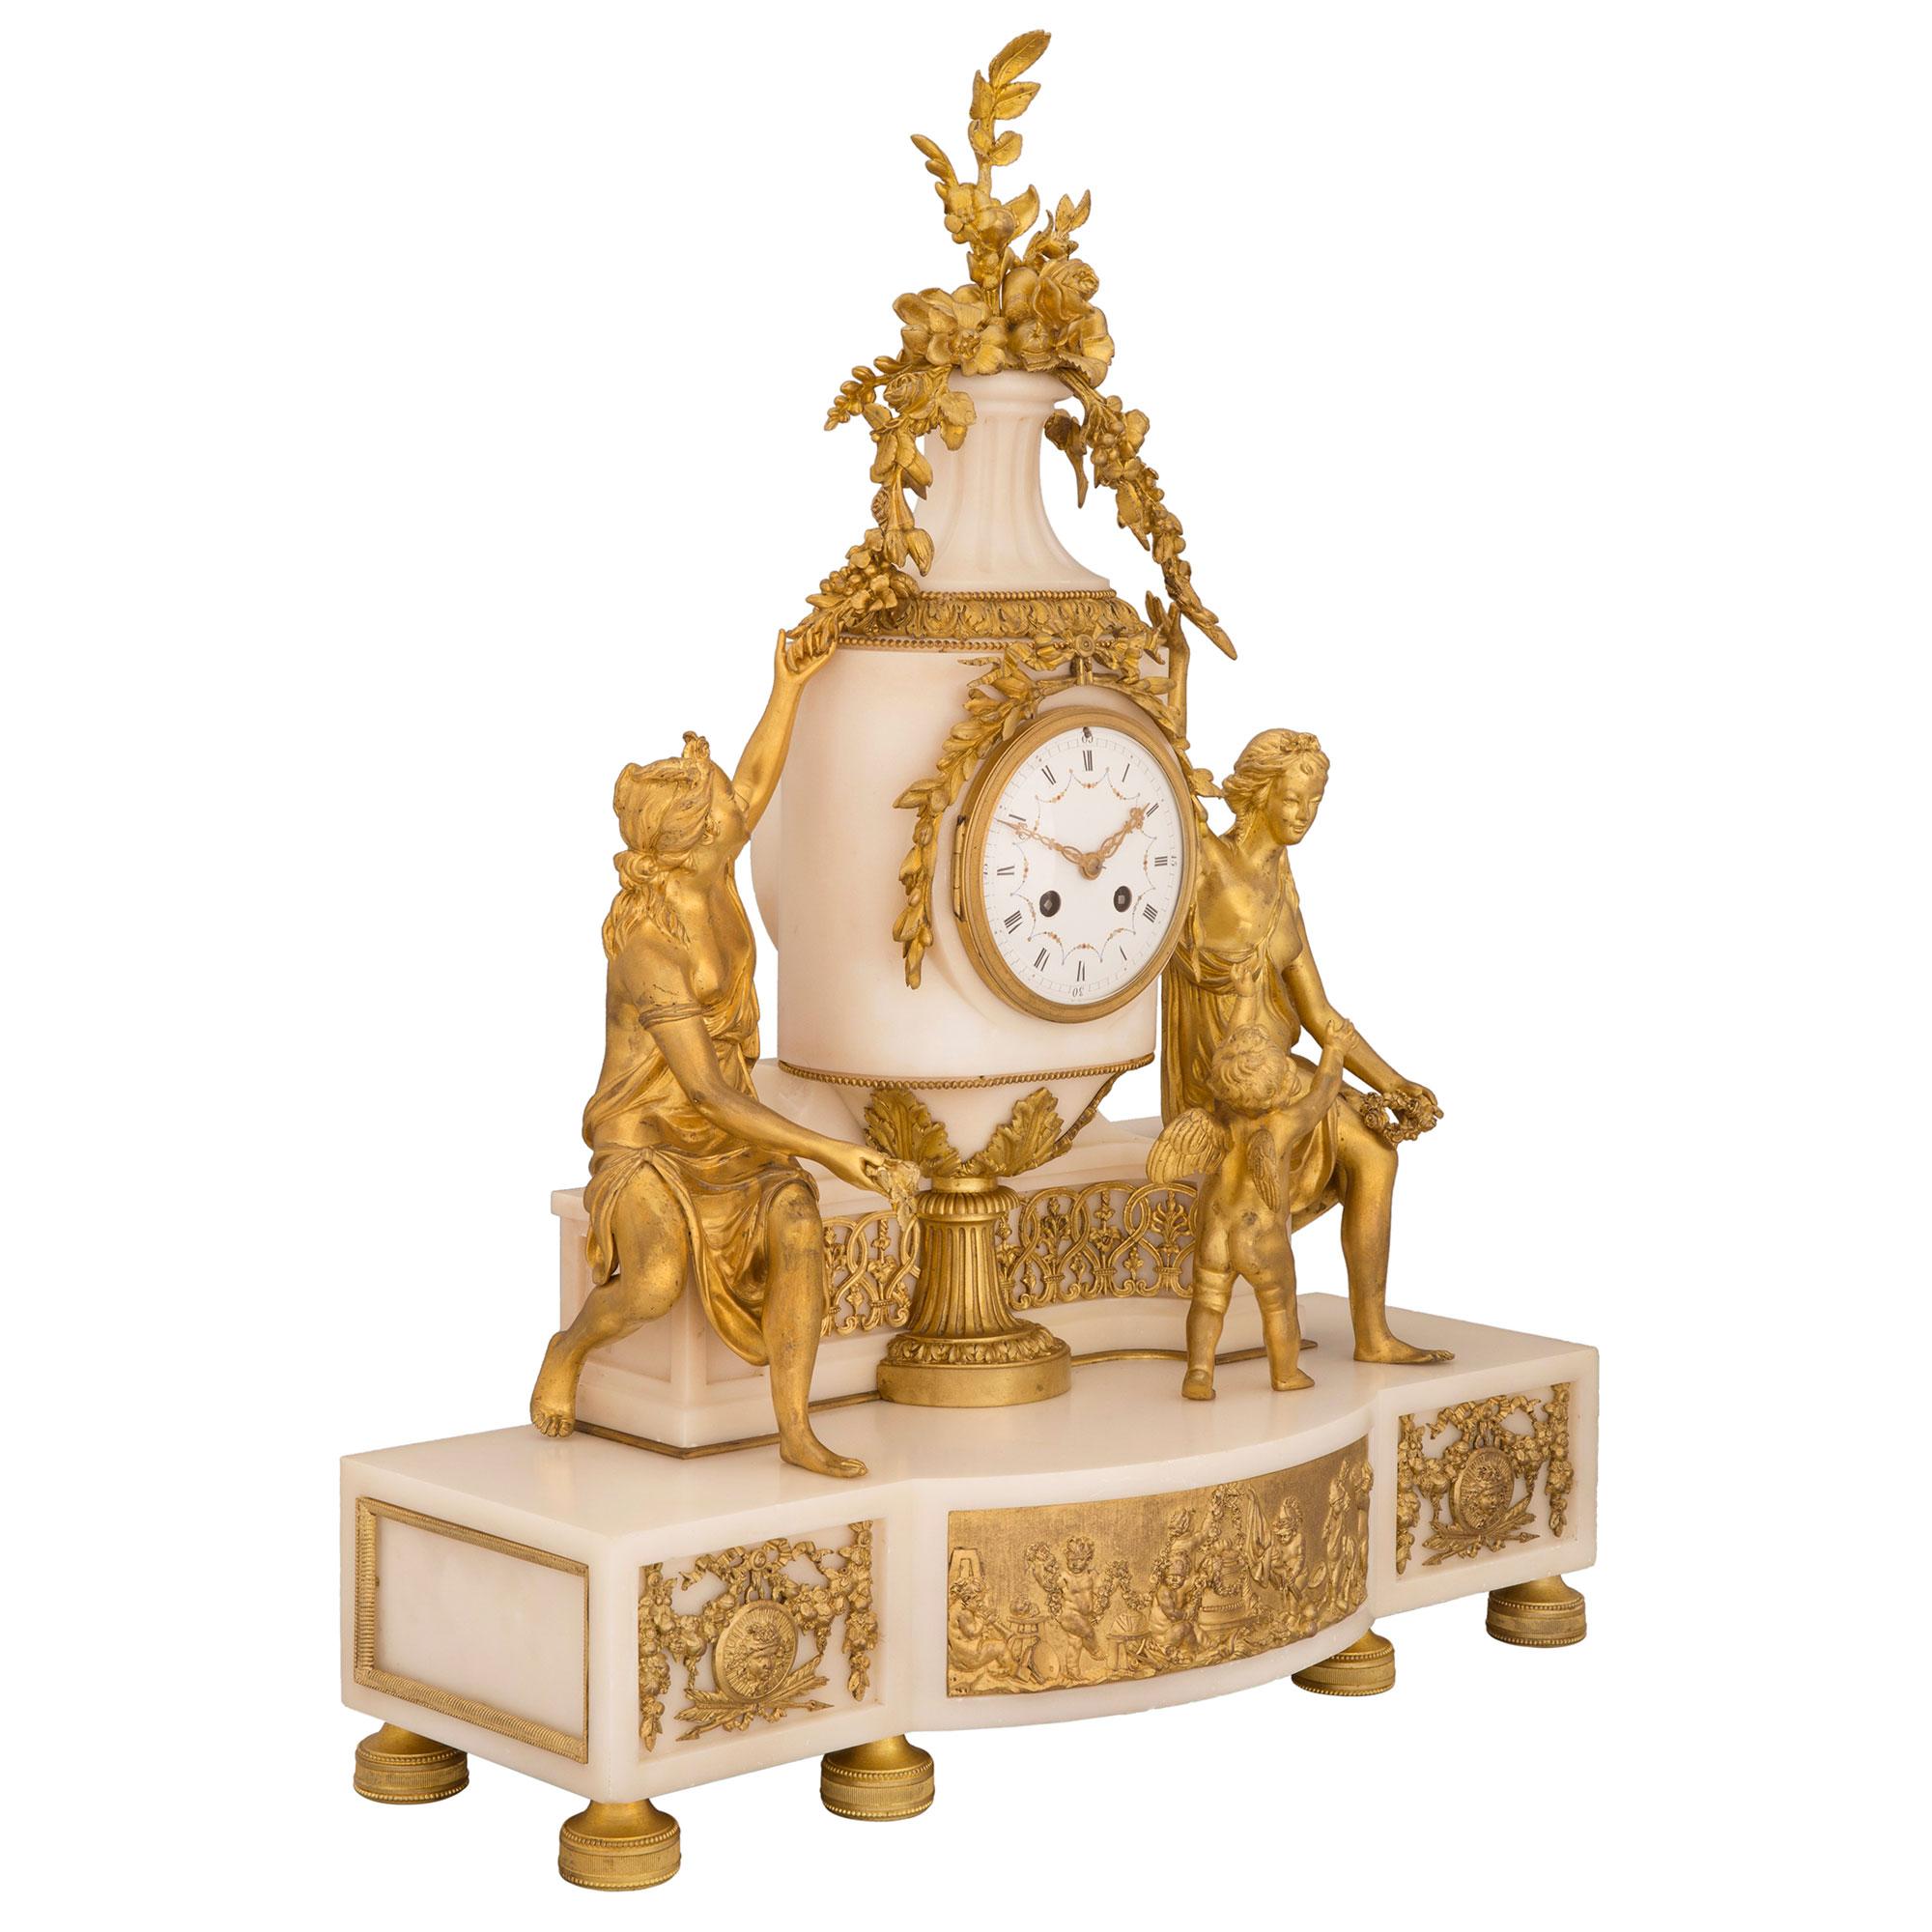 A spectacular French 19th century Louis XVI st. white Carrara marble and ormolu clock, signed Samuel Marti. The clock is raised by six beautiful circular ormolu feet with fine fluted and beaded designs. The white Carrara marble base displays a most